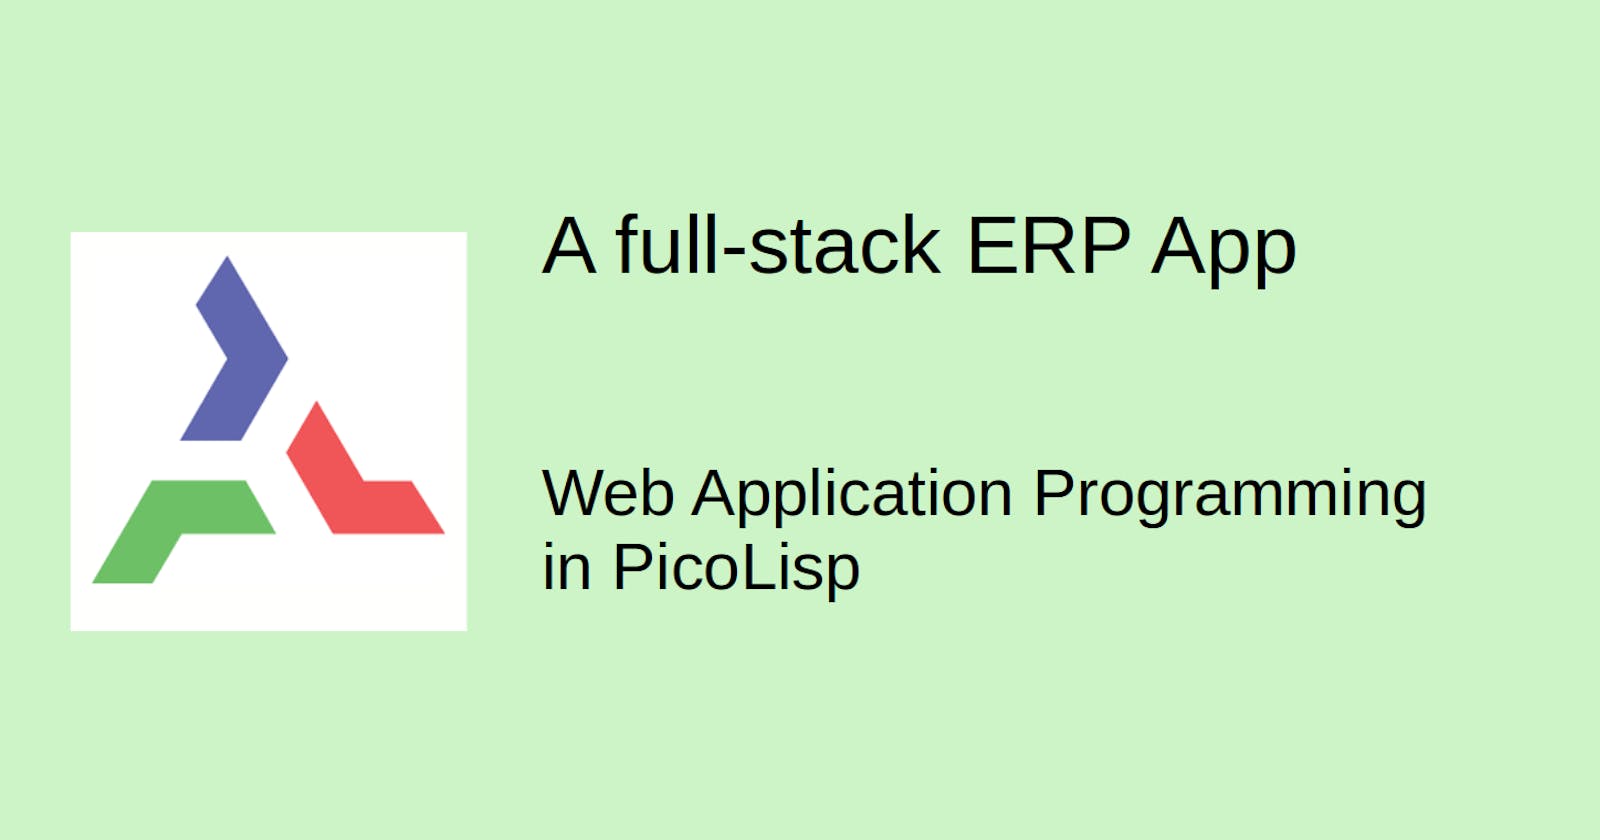 Web App Example: A full-stack ERP App